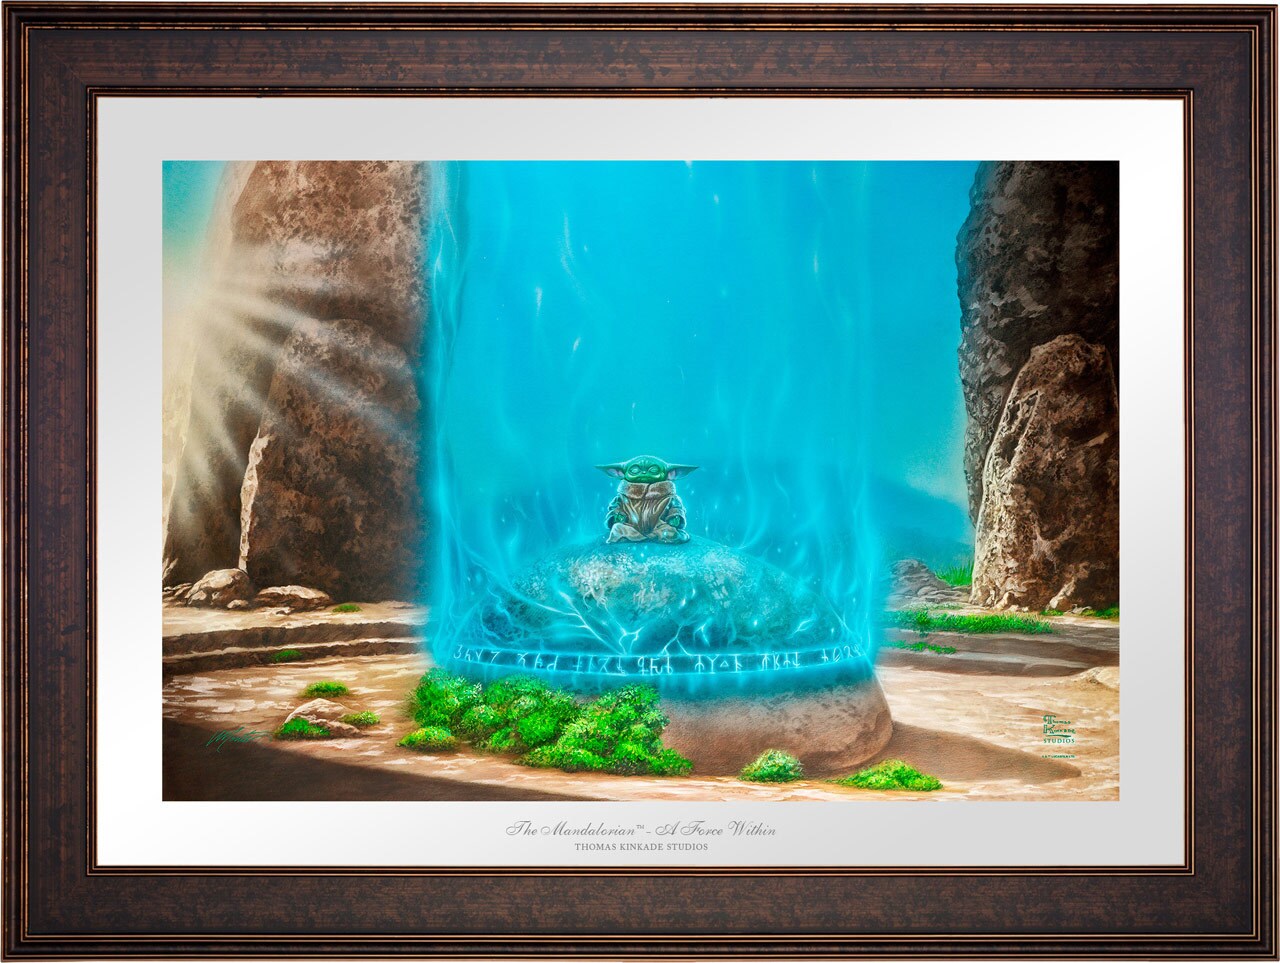 "A Force Within" print from Thomas Kinkade featuring Grogu meditating on the seeing stone.